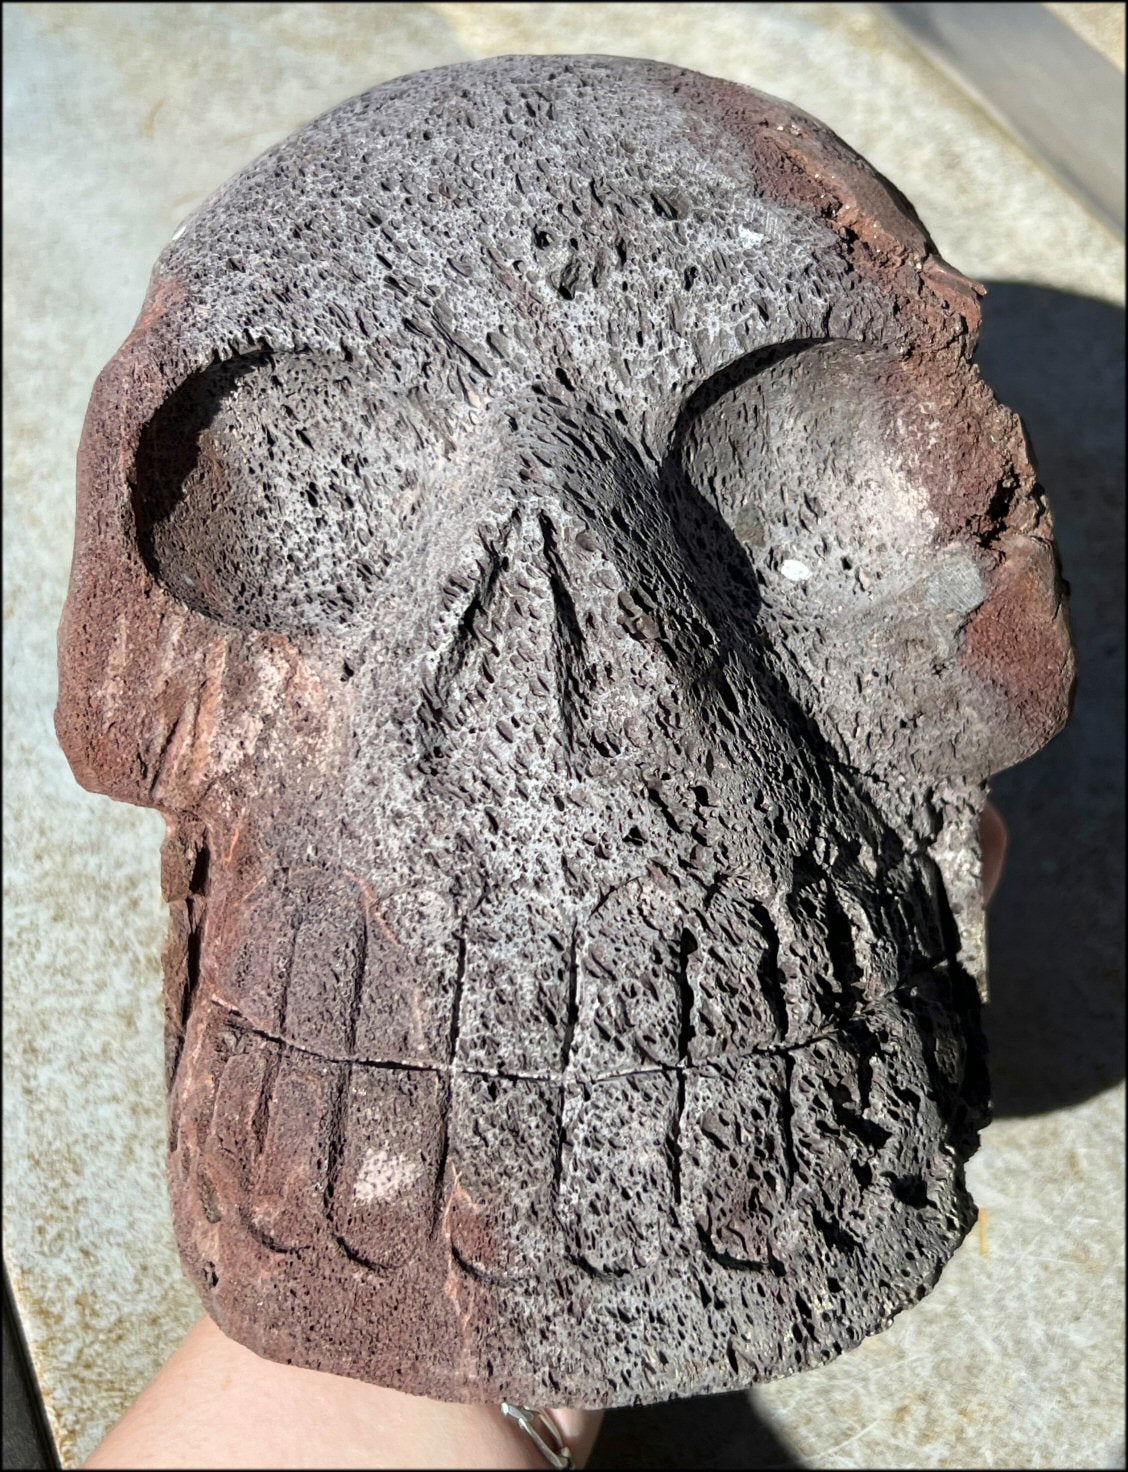 Larger Than LifeSize Black + Red Volcanic Lava Crystal Skull "LUDO" - With Synergy 10+ Years